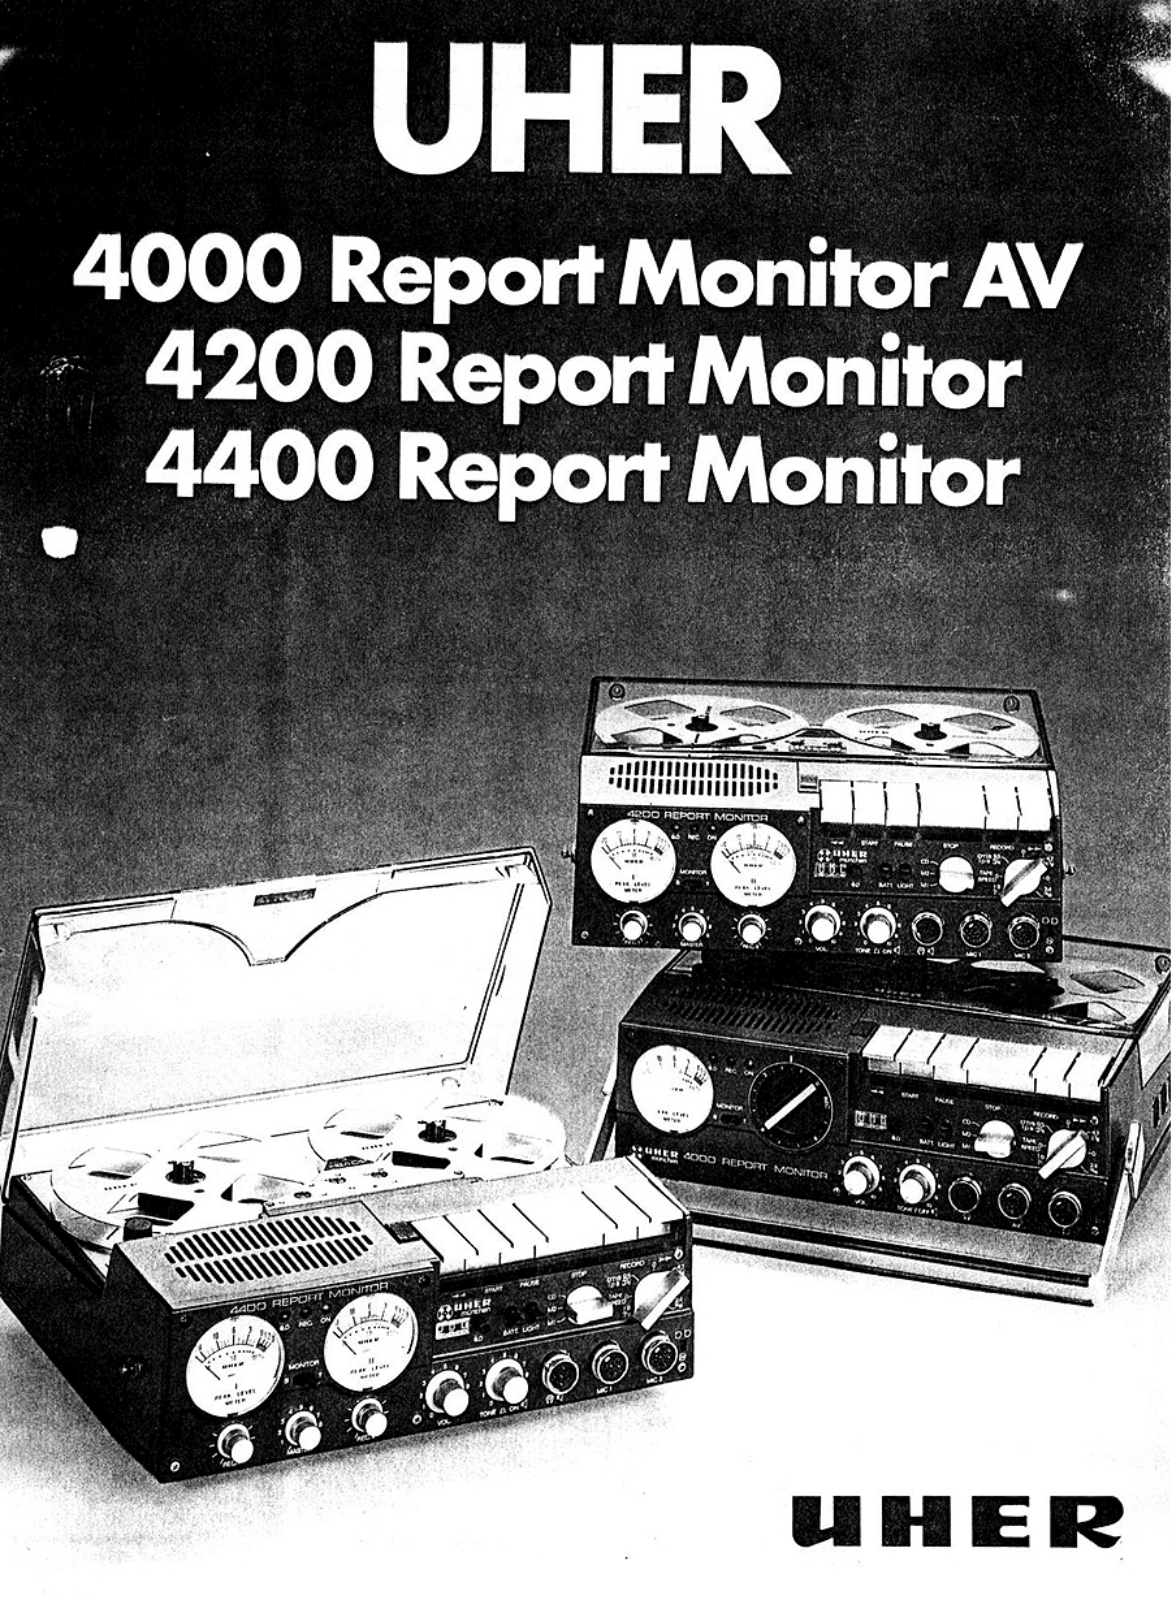 Uher 4400 Report Monitor Brochure